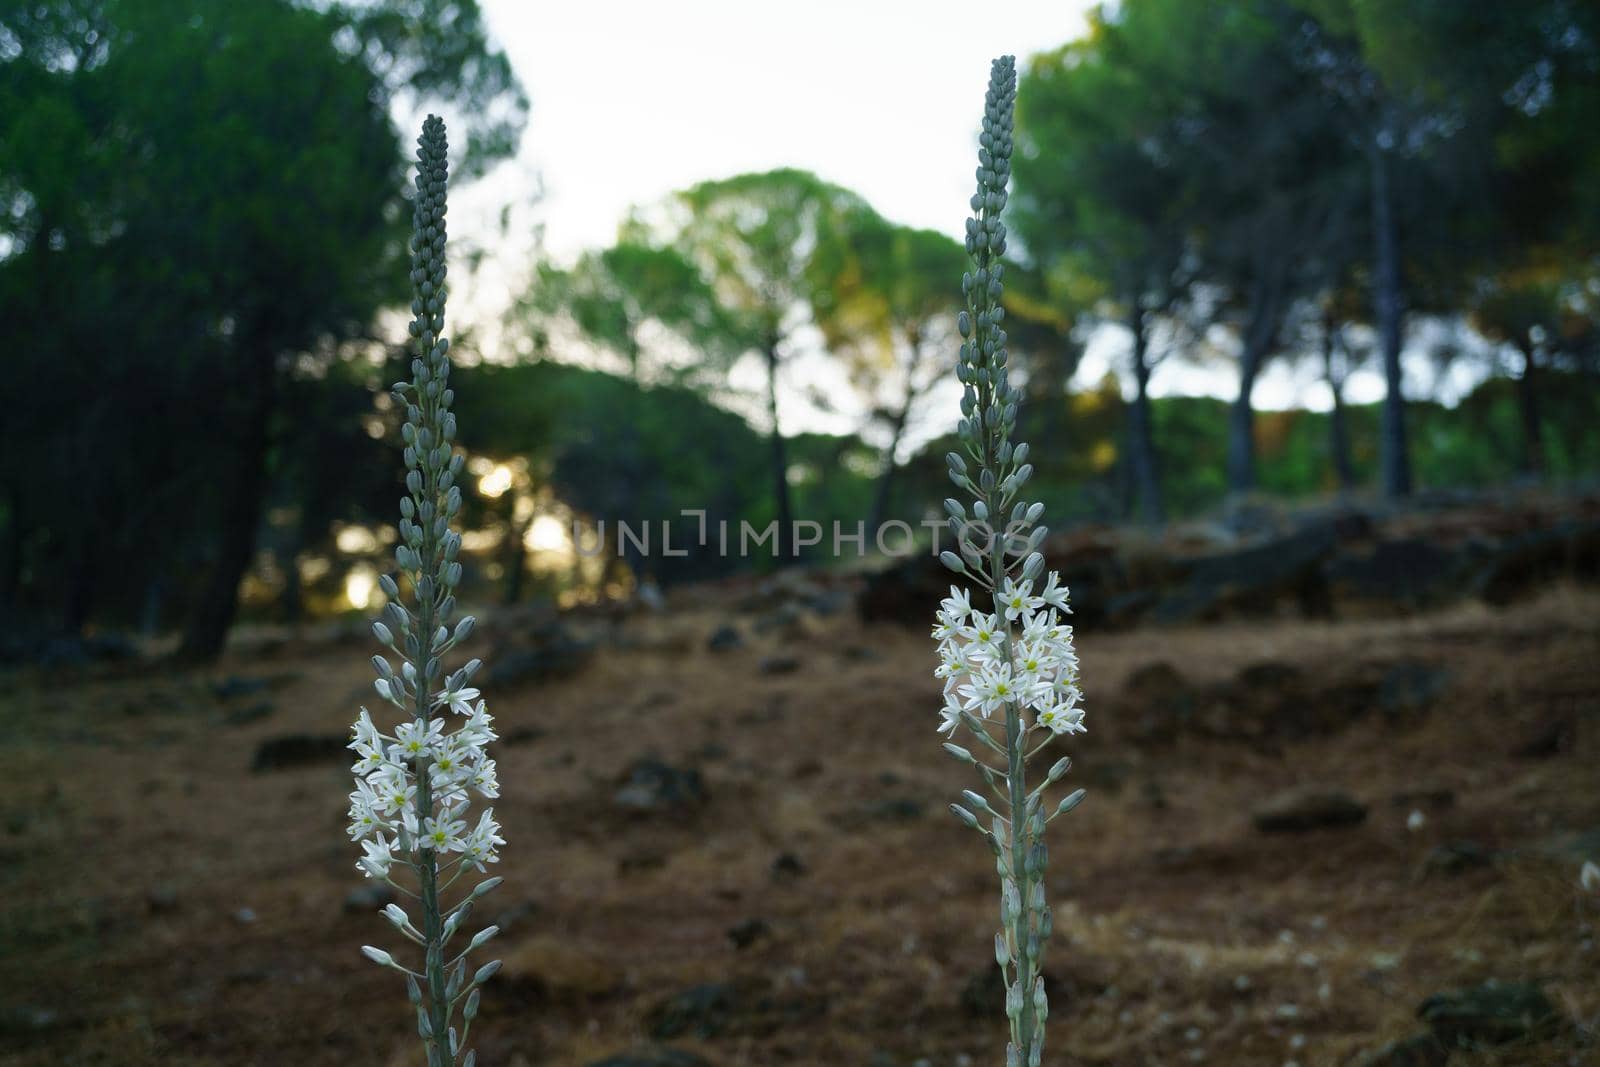 close-up of two plants with white flowers of Asphodelus albus by joseantona